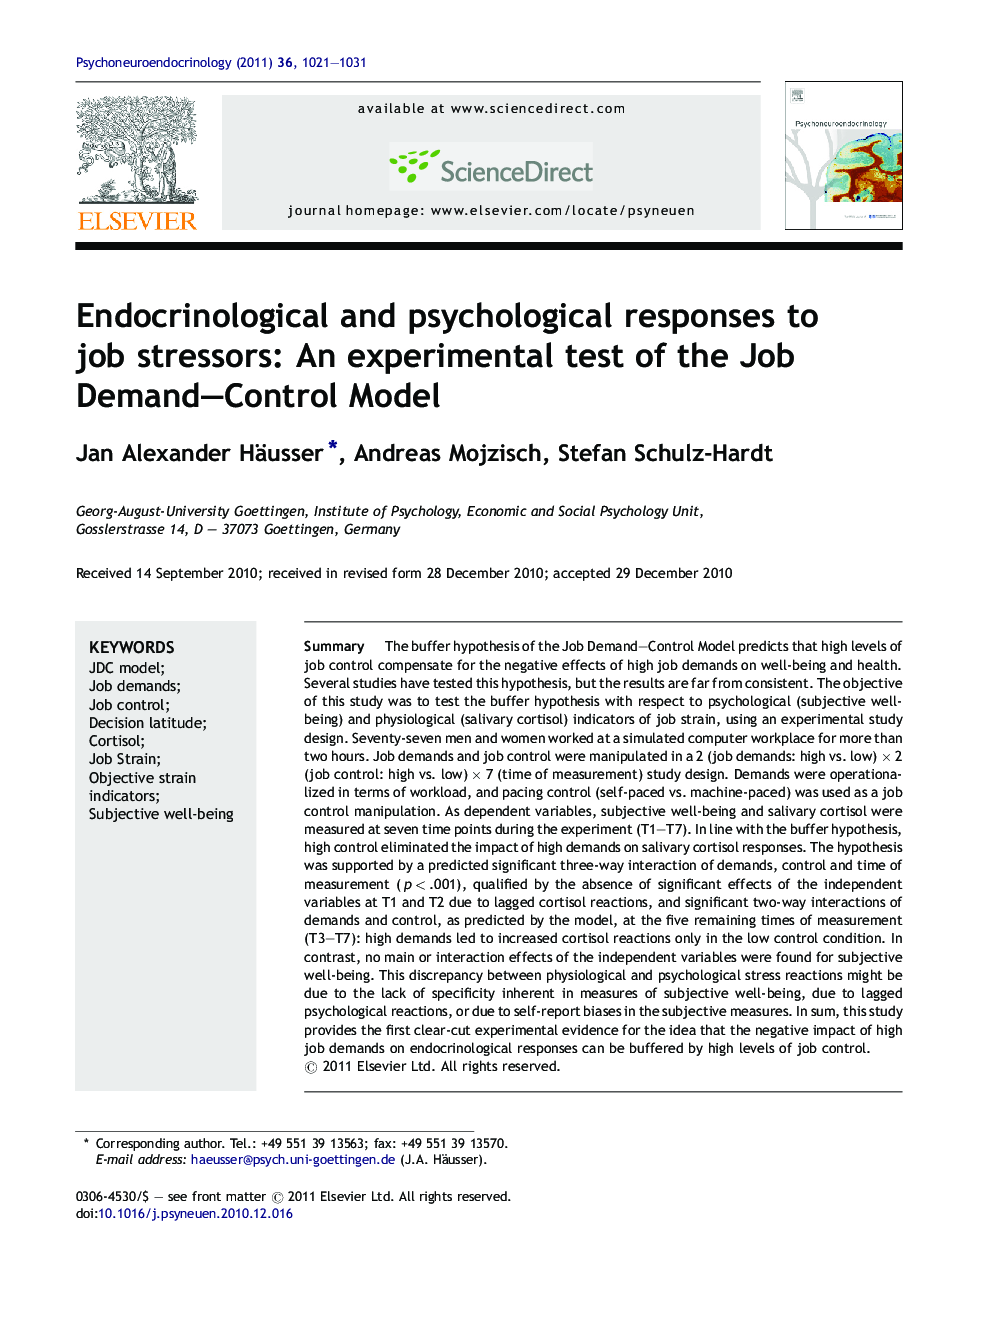 Endocrinological and psychological responses to job stressors: An experimental test of the Job Demand-Control Model